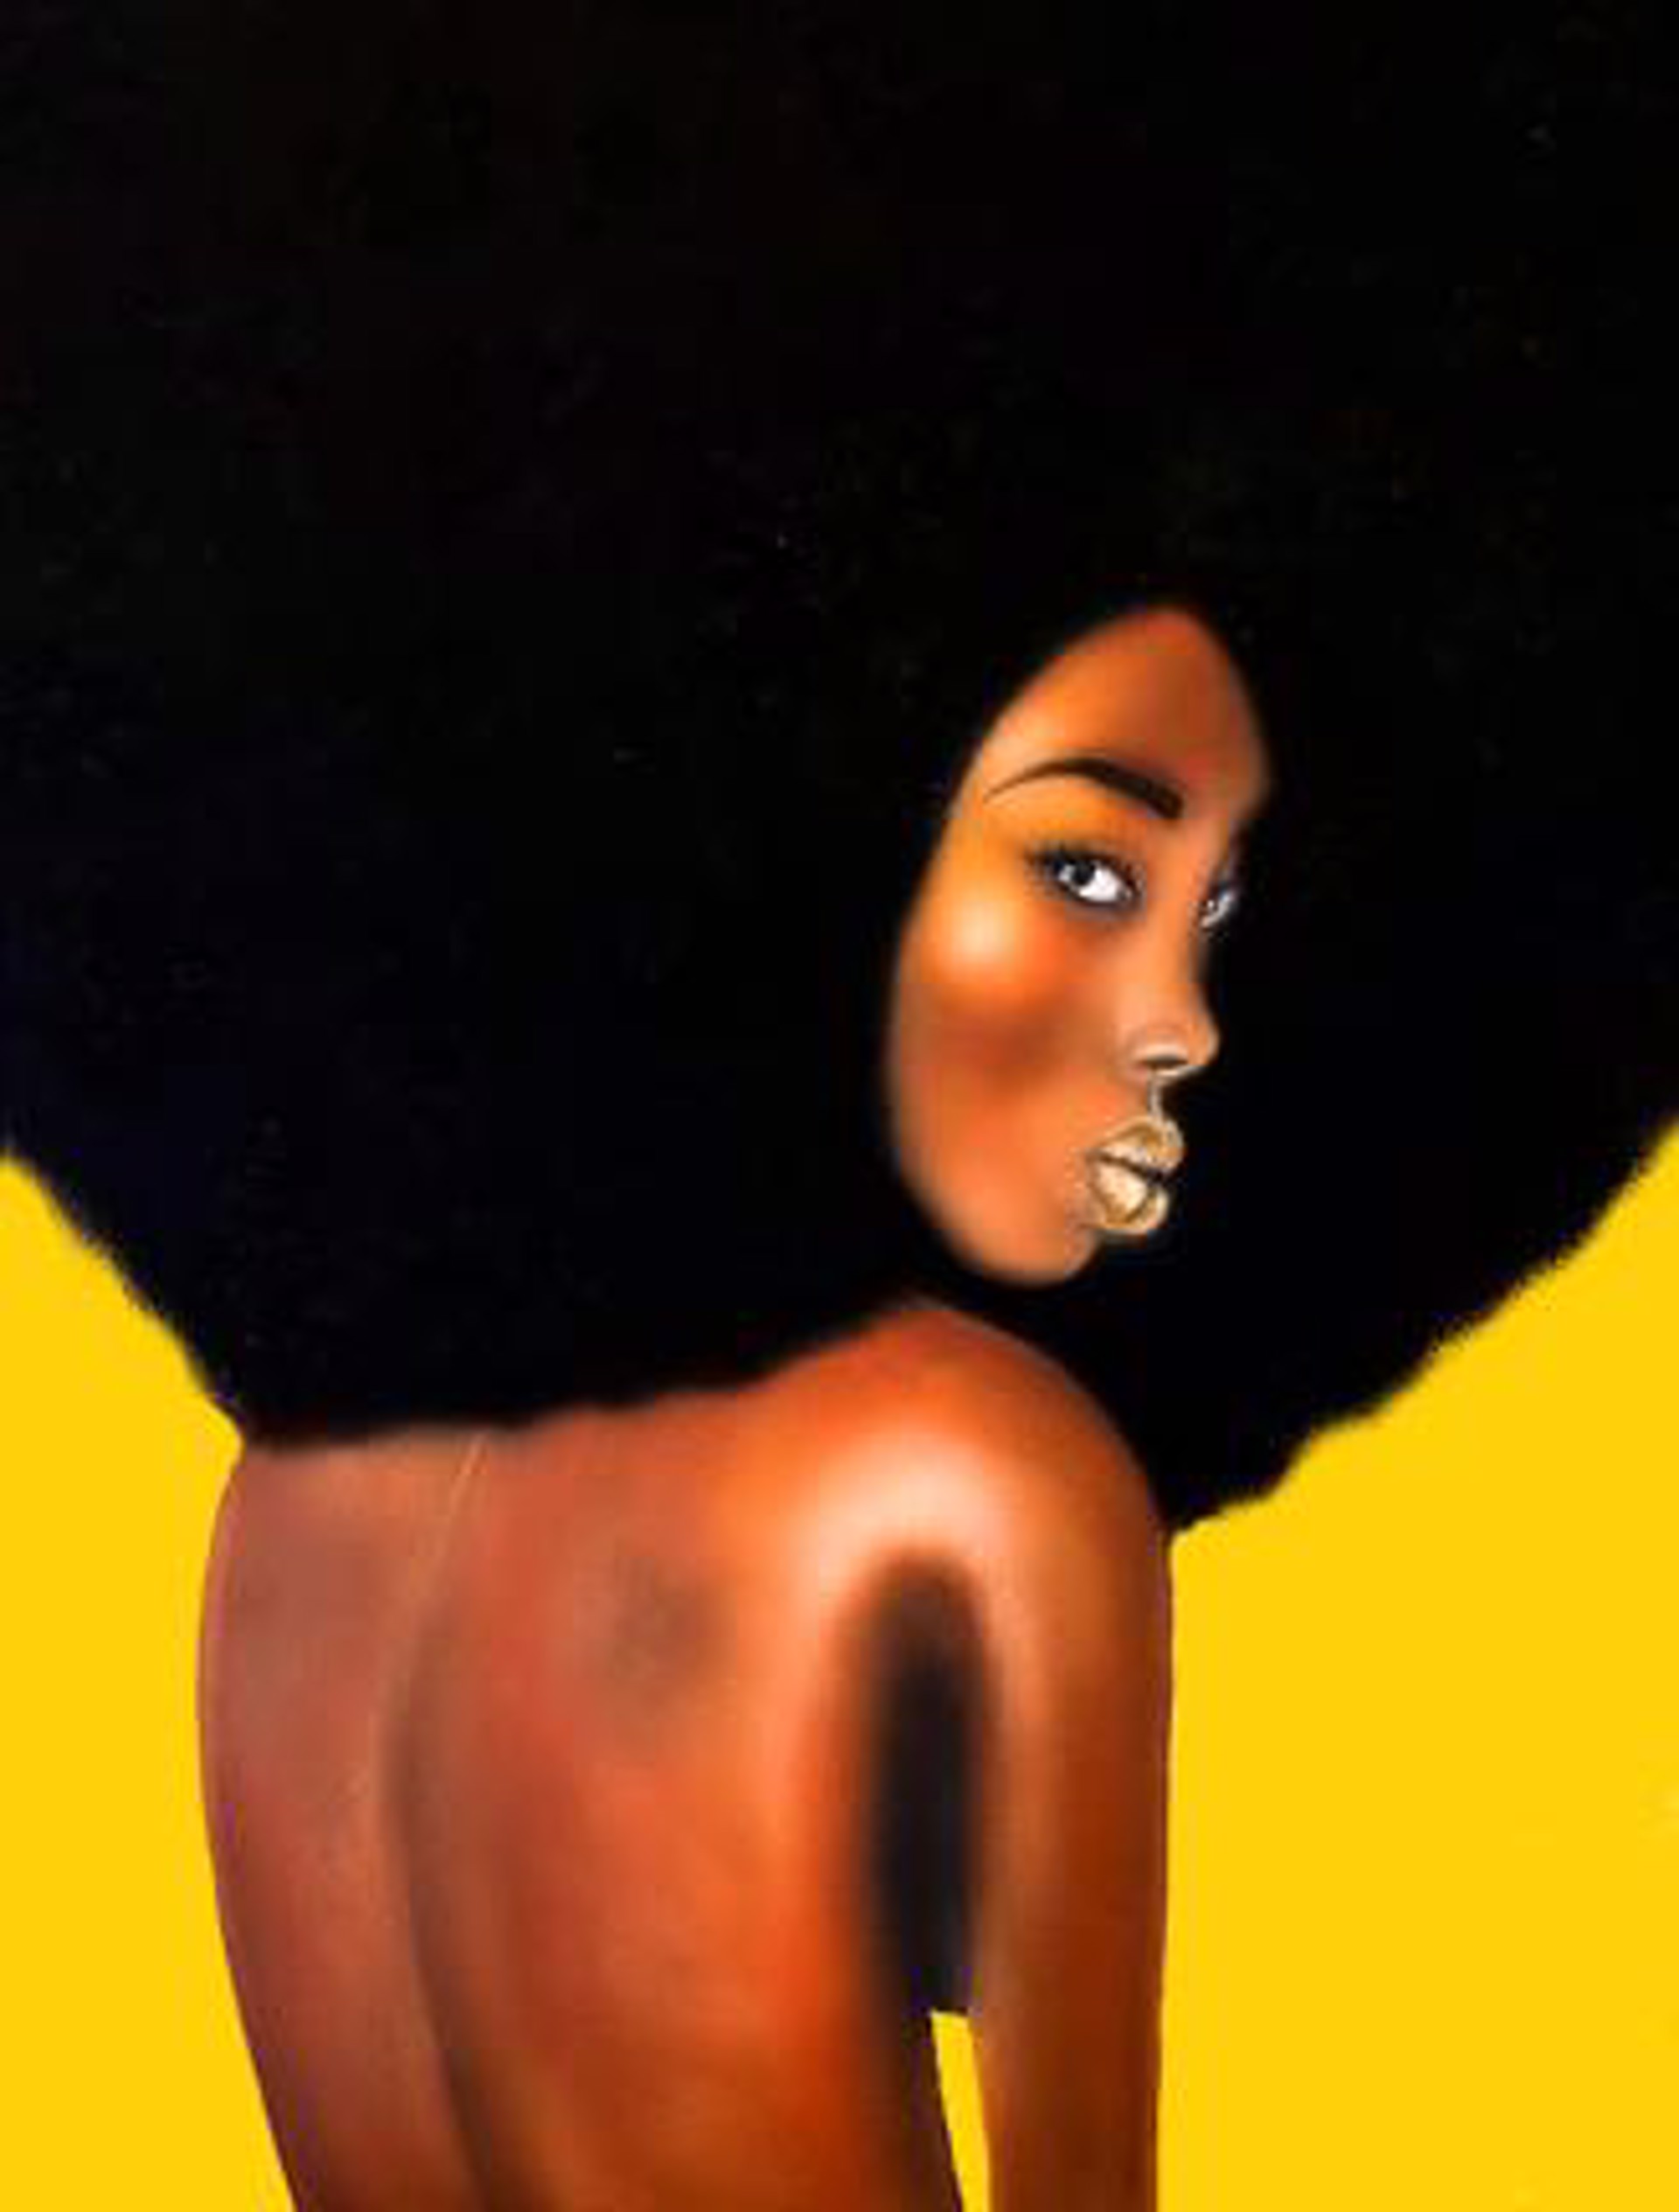 JUST AFRO by Guylaine Conquet